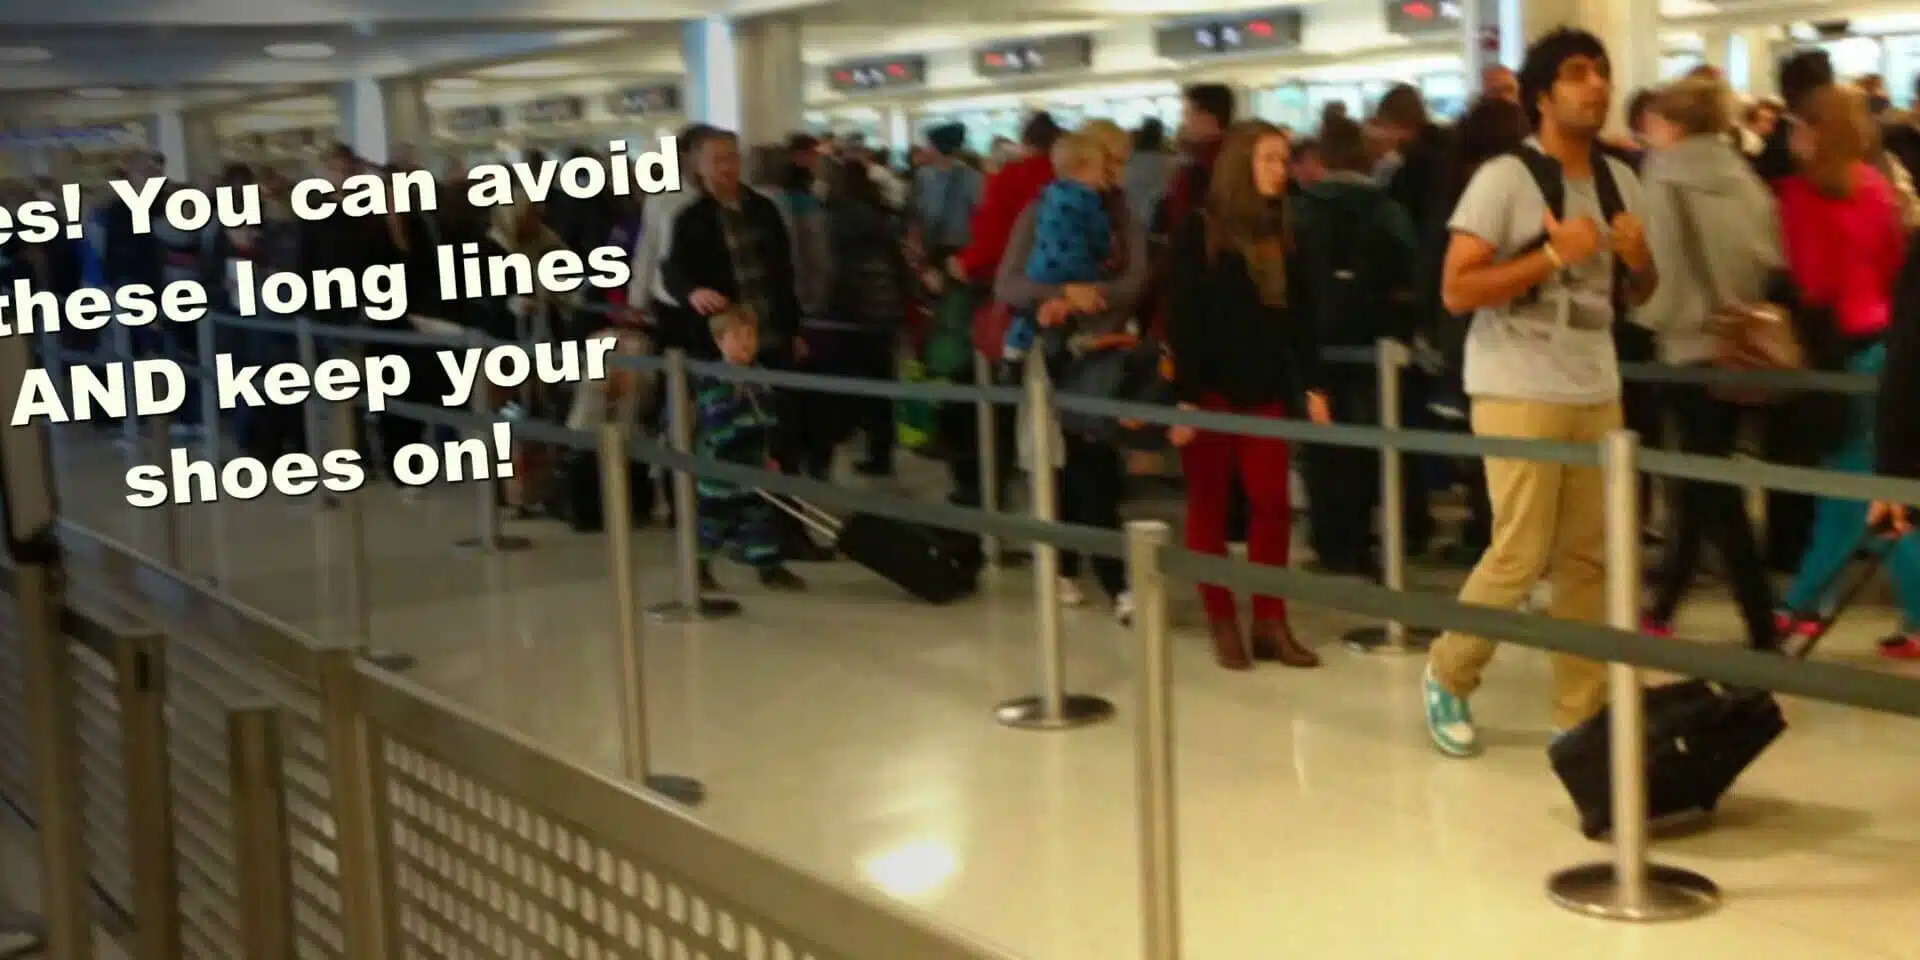 people standing in line at an airport